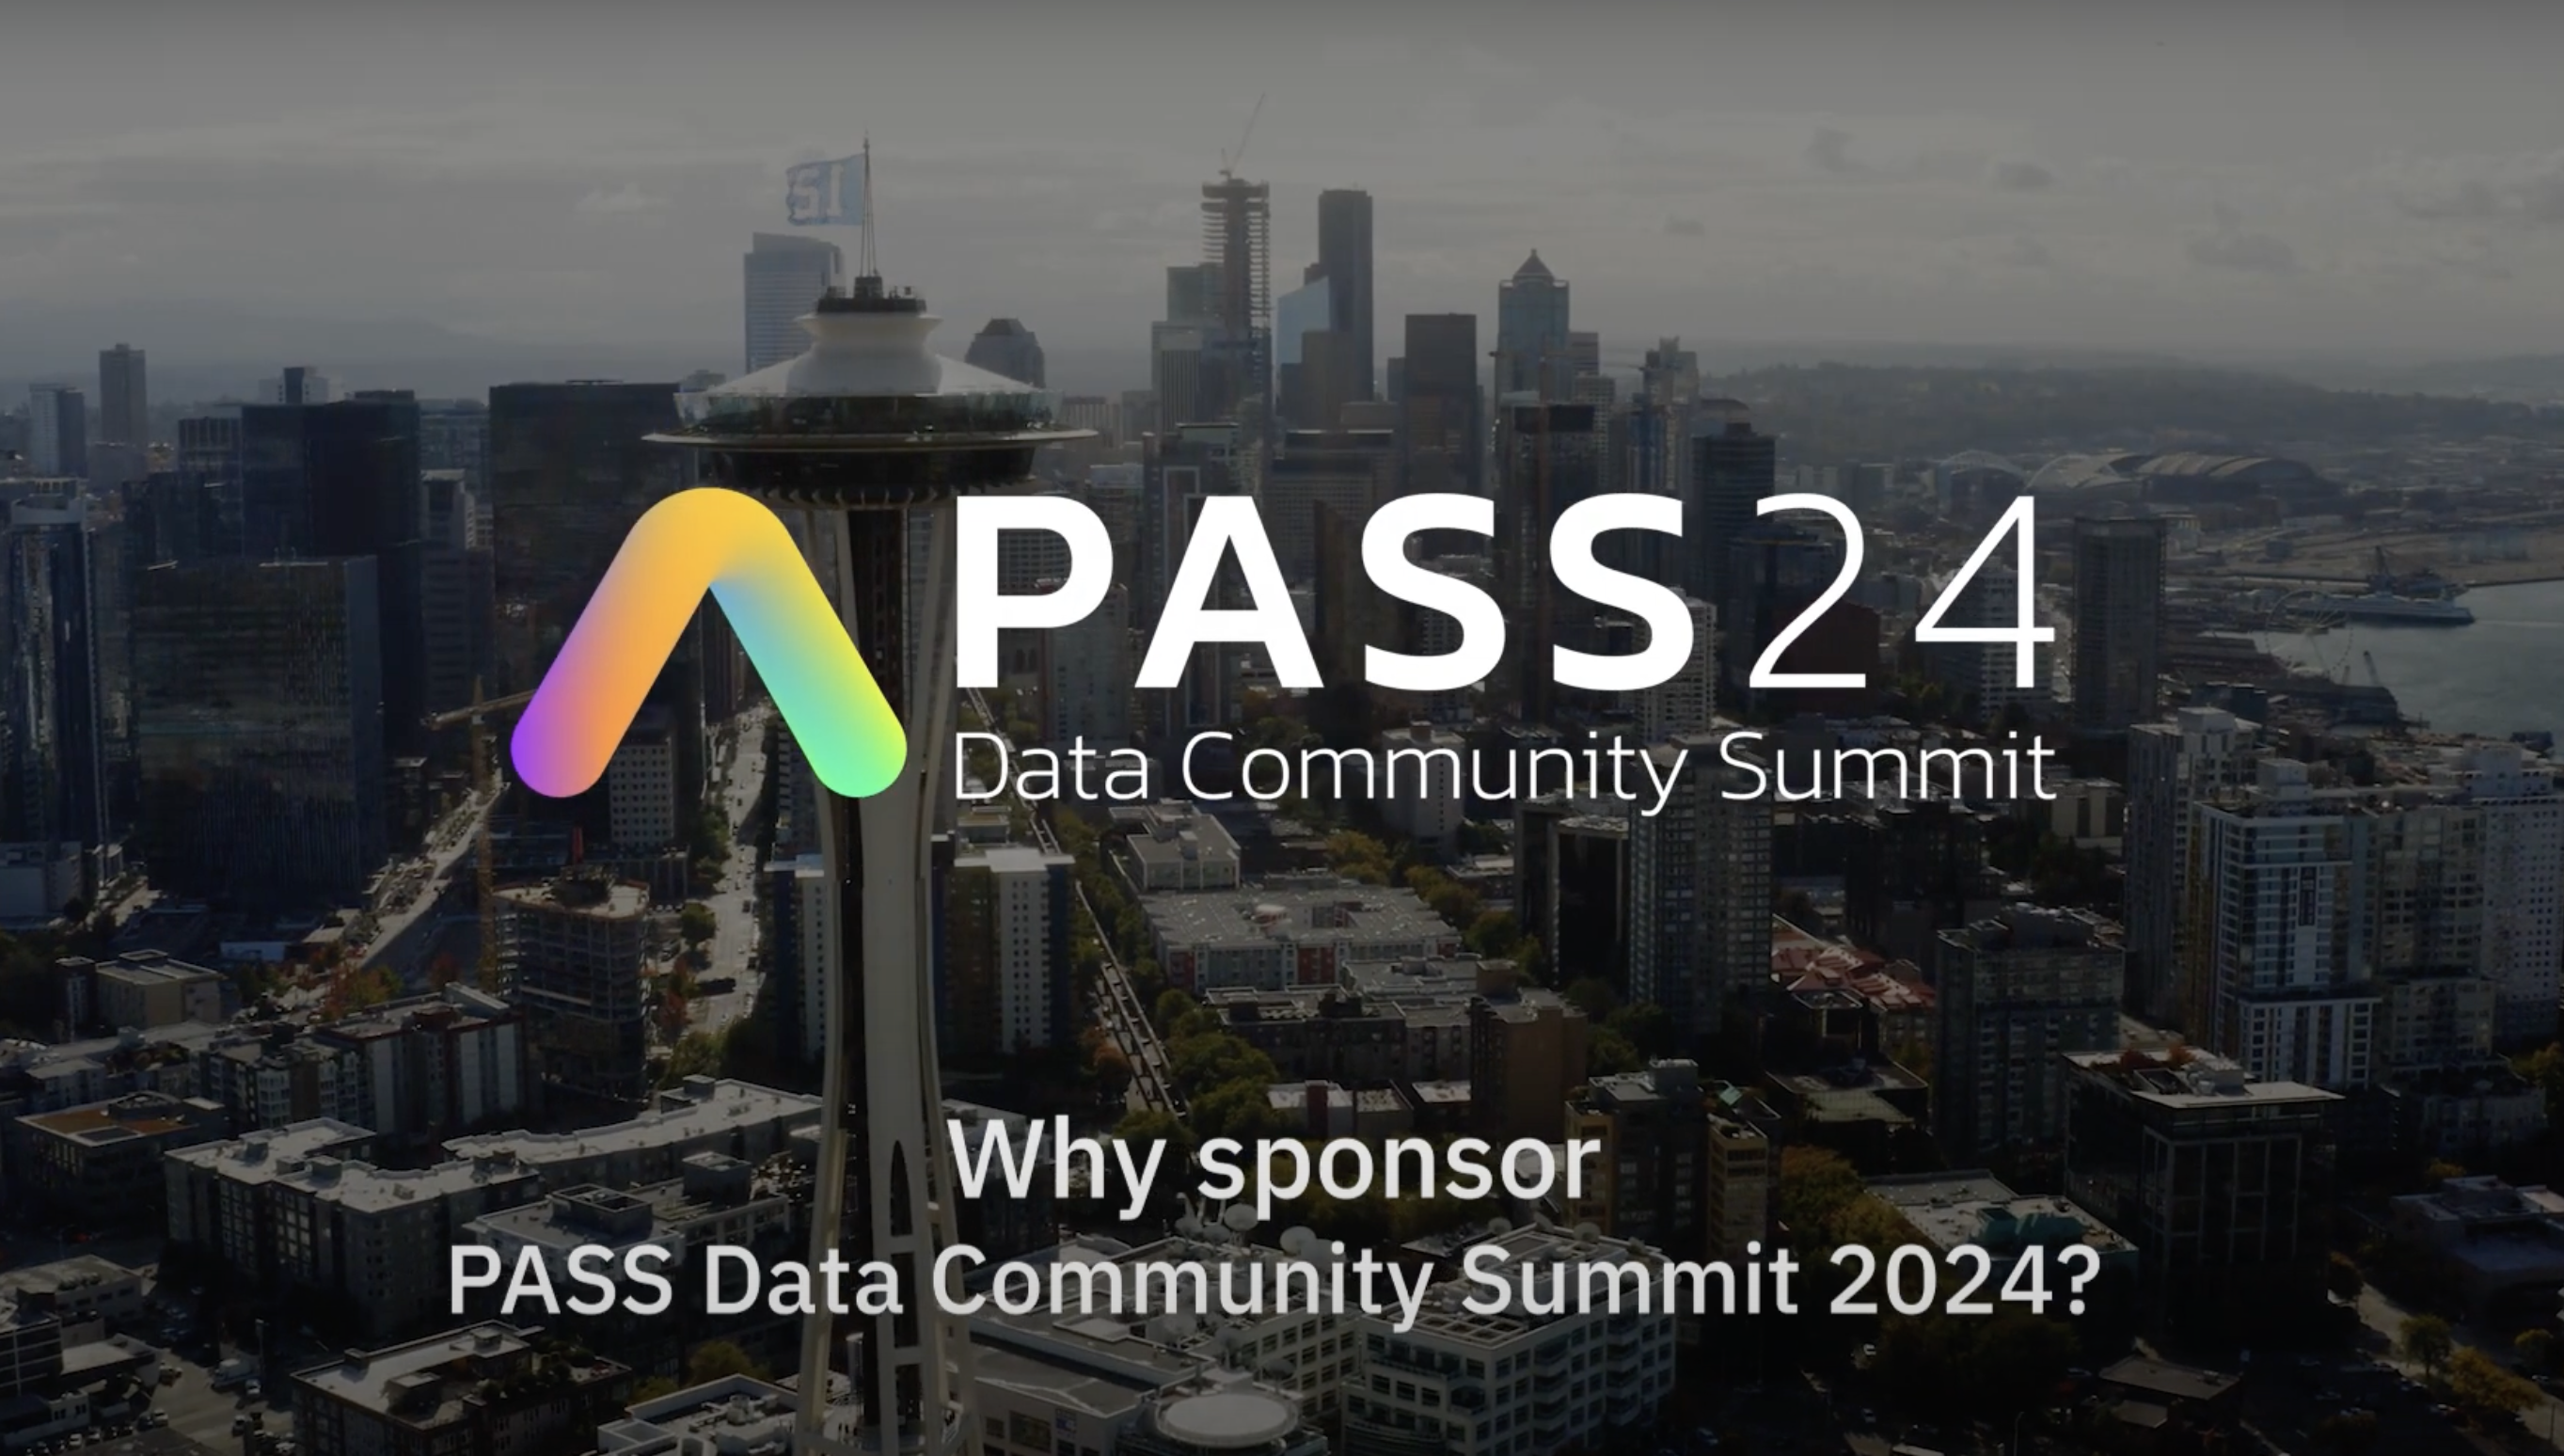 PASS Data Community Summit 2024 - Sponsorships available now